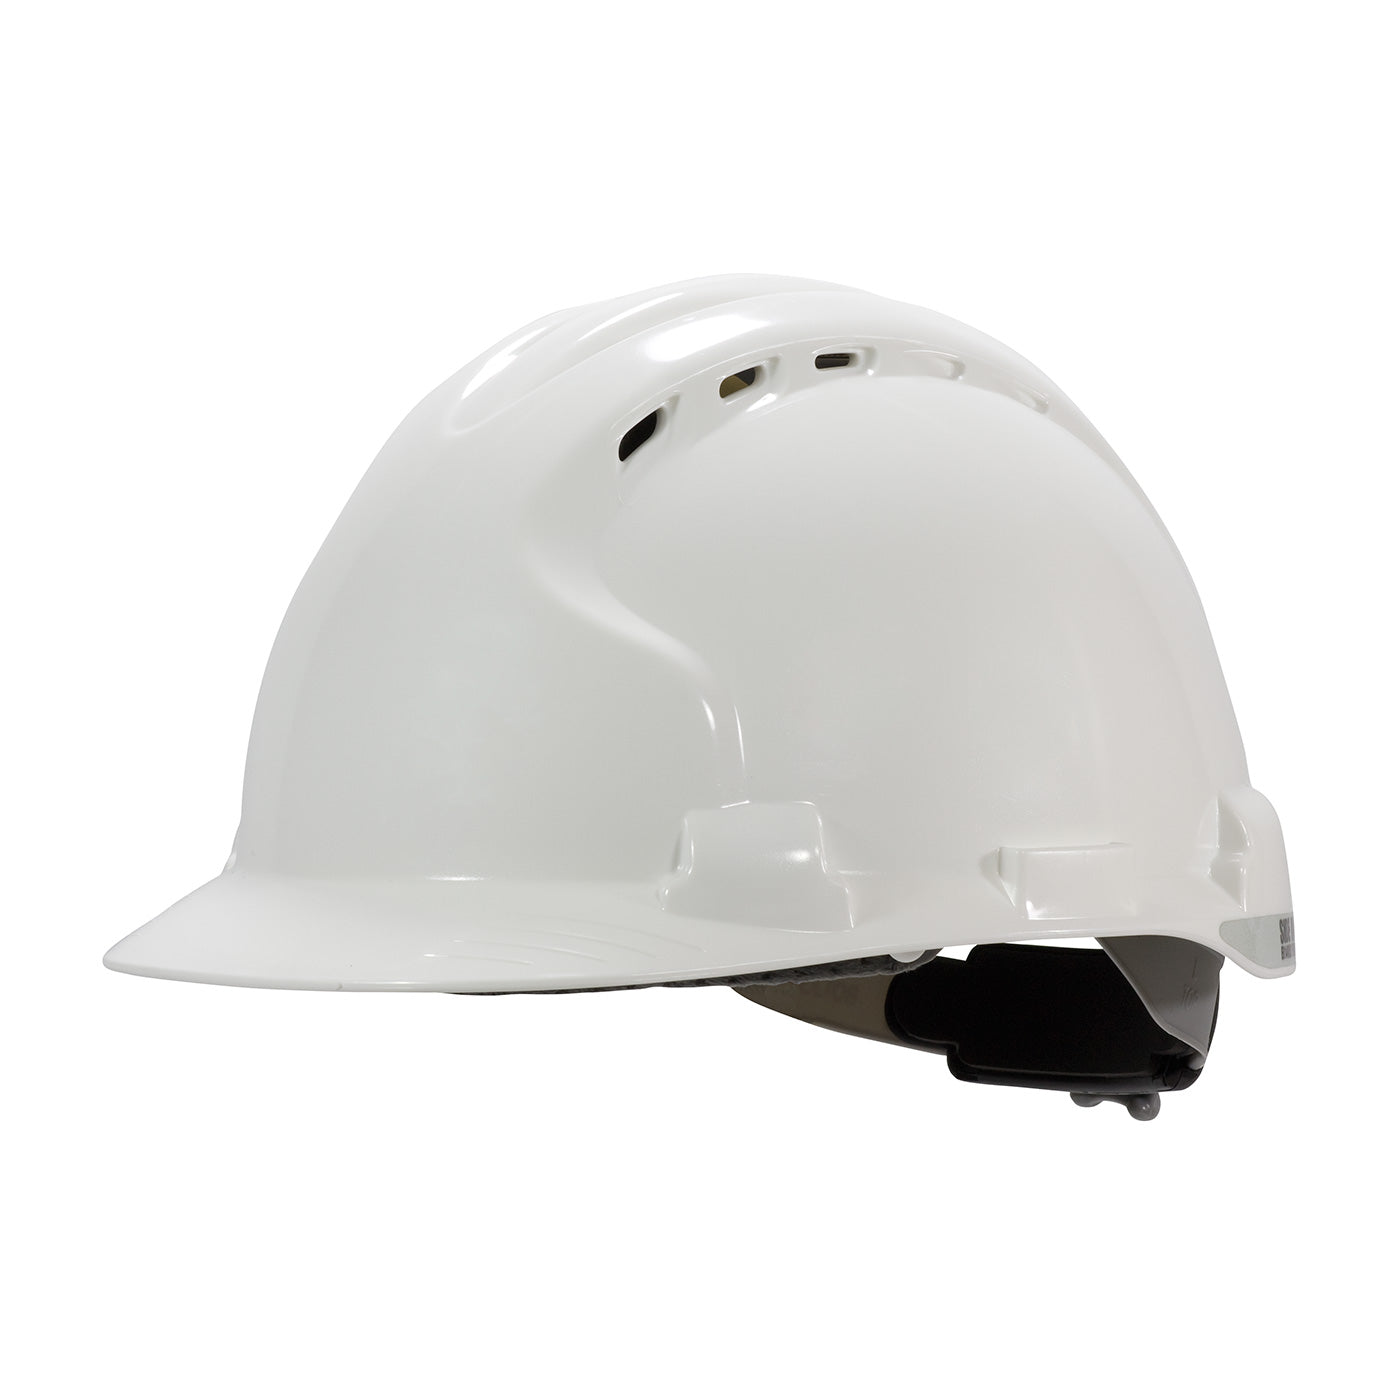 Protective Industrial Products-MK8 EVOLUTION® HARD HAT (VENTED)-eSafety Supplies, Inc